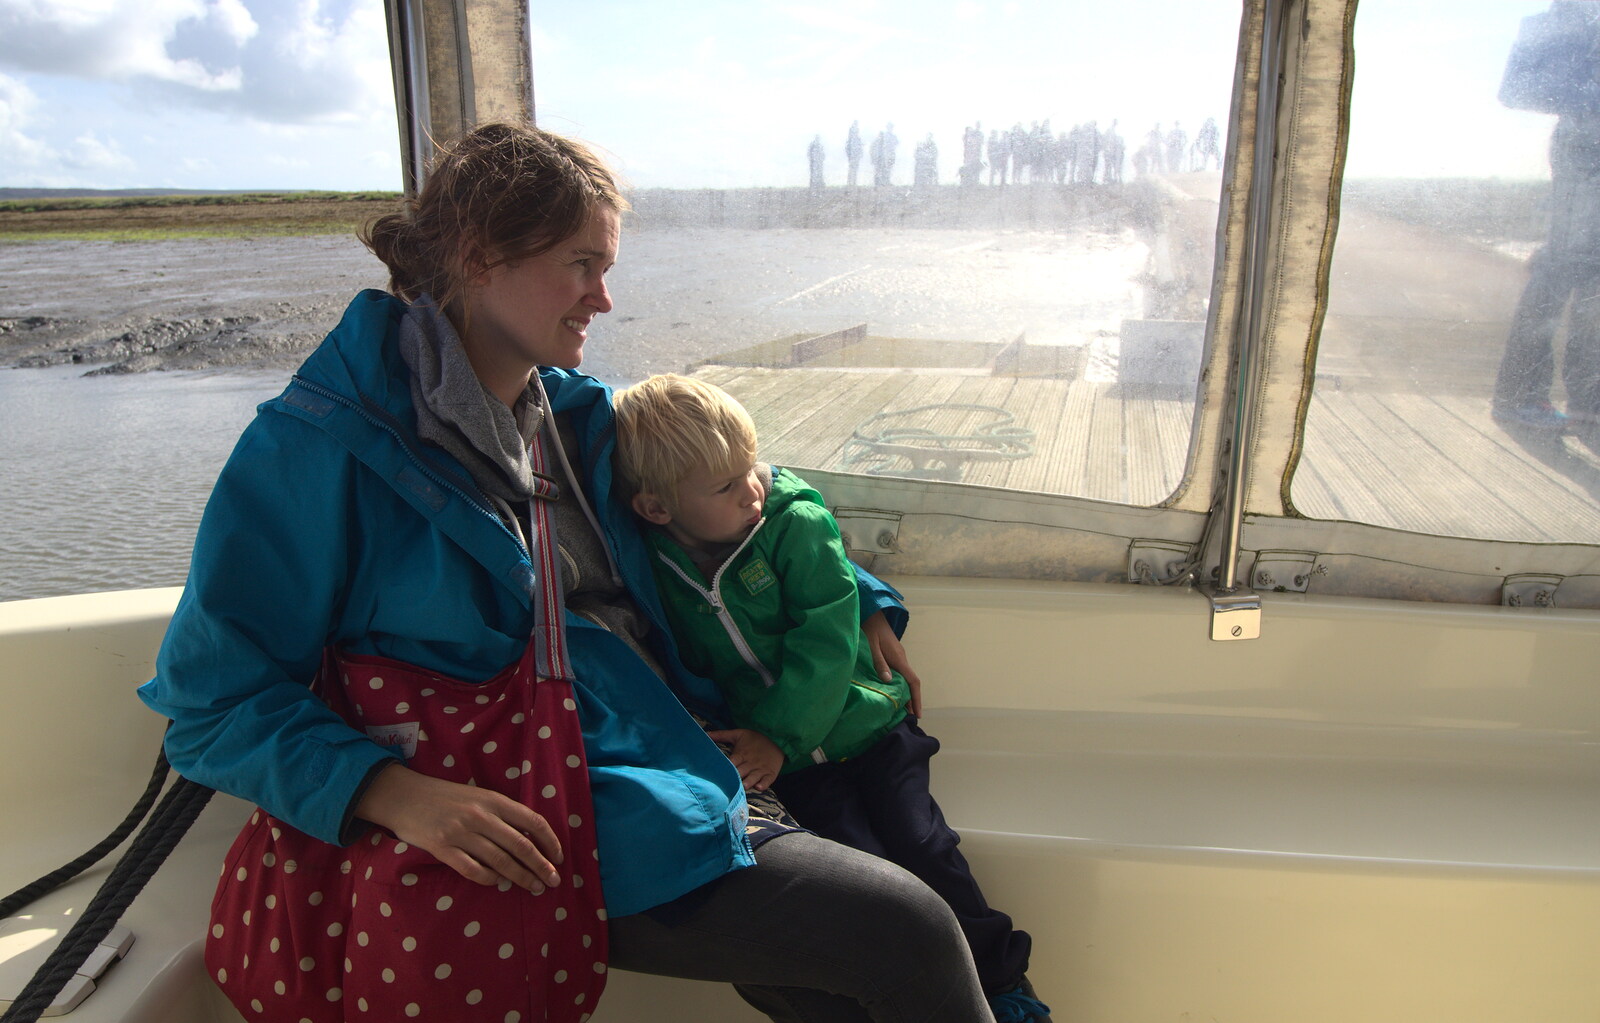 Isobel and Harry on the ferry back from A Trip to Hurst Castle, Keyhaven, Hampshire - 28th August 2015